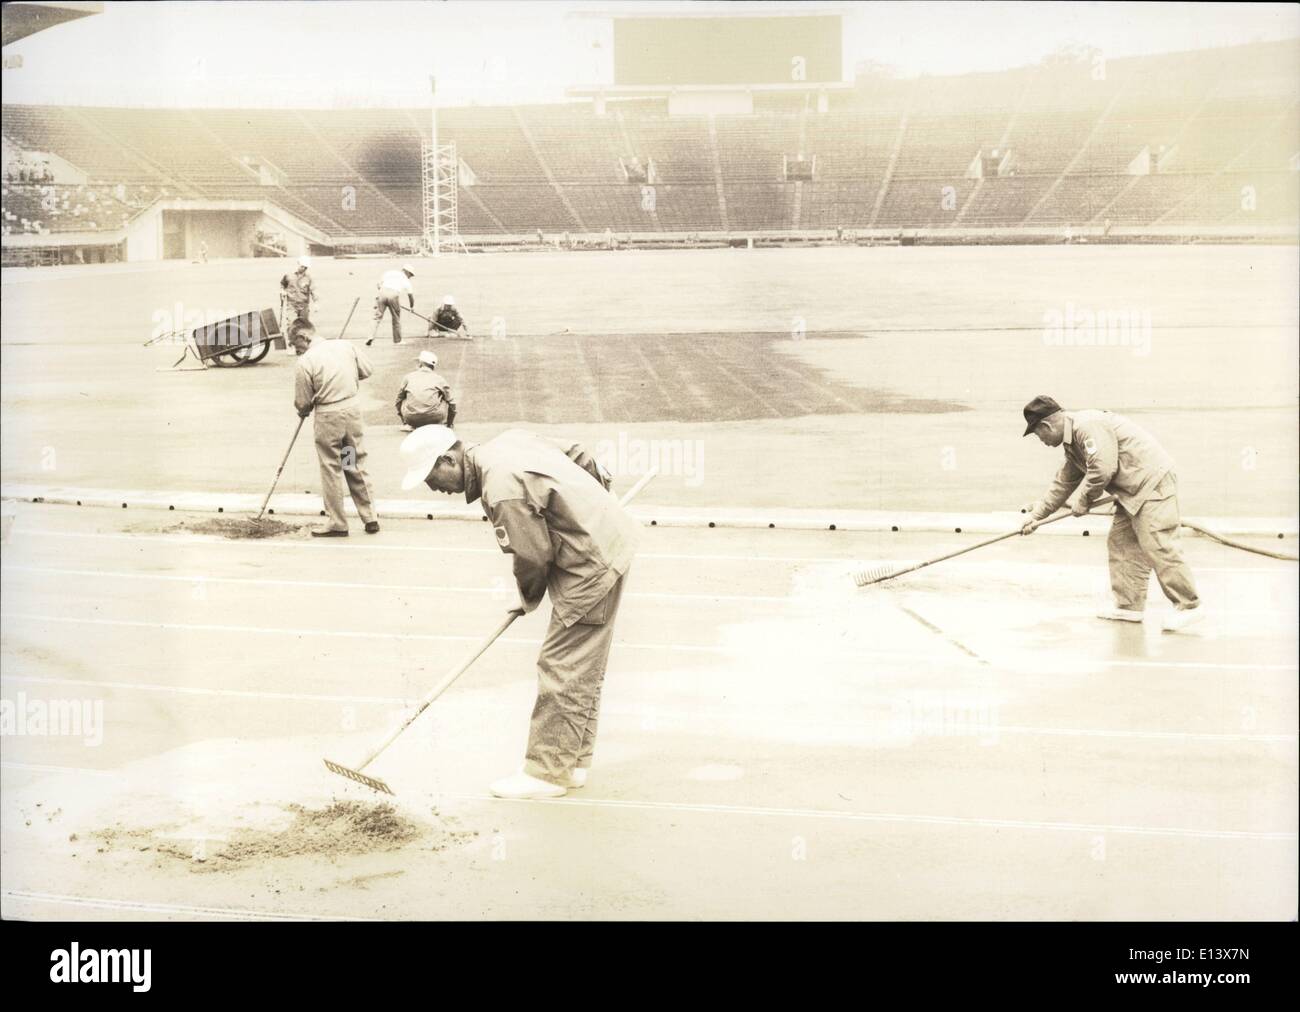 Mar. 27, 2012 - Near Disaster at Tokyo Olympics.: Workmen are trying to save the track at the National Stadium by repairing the Stock Photo